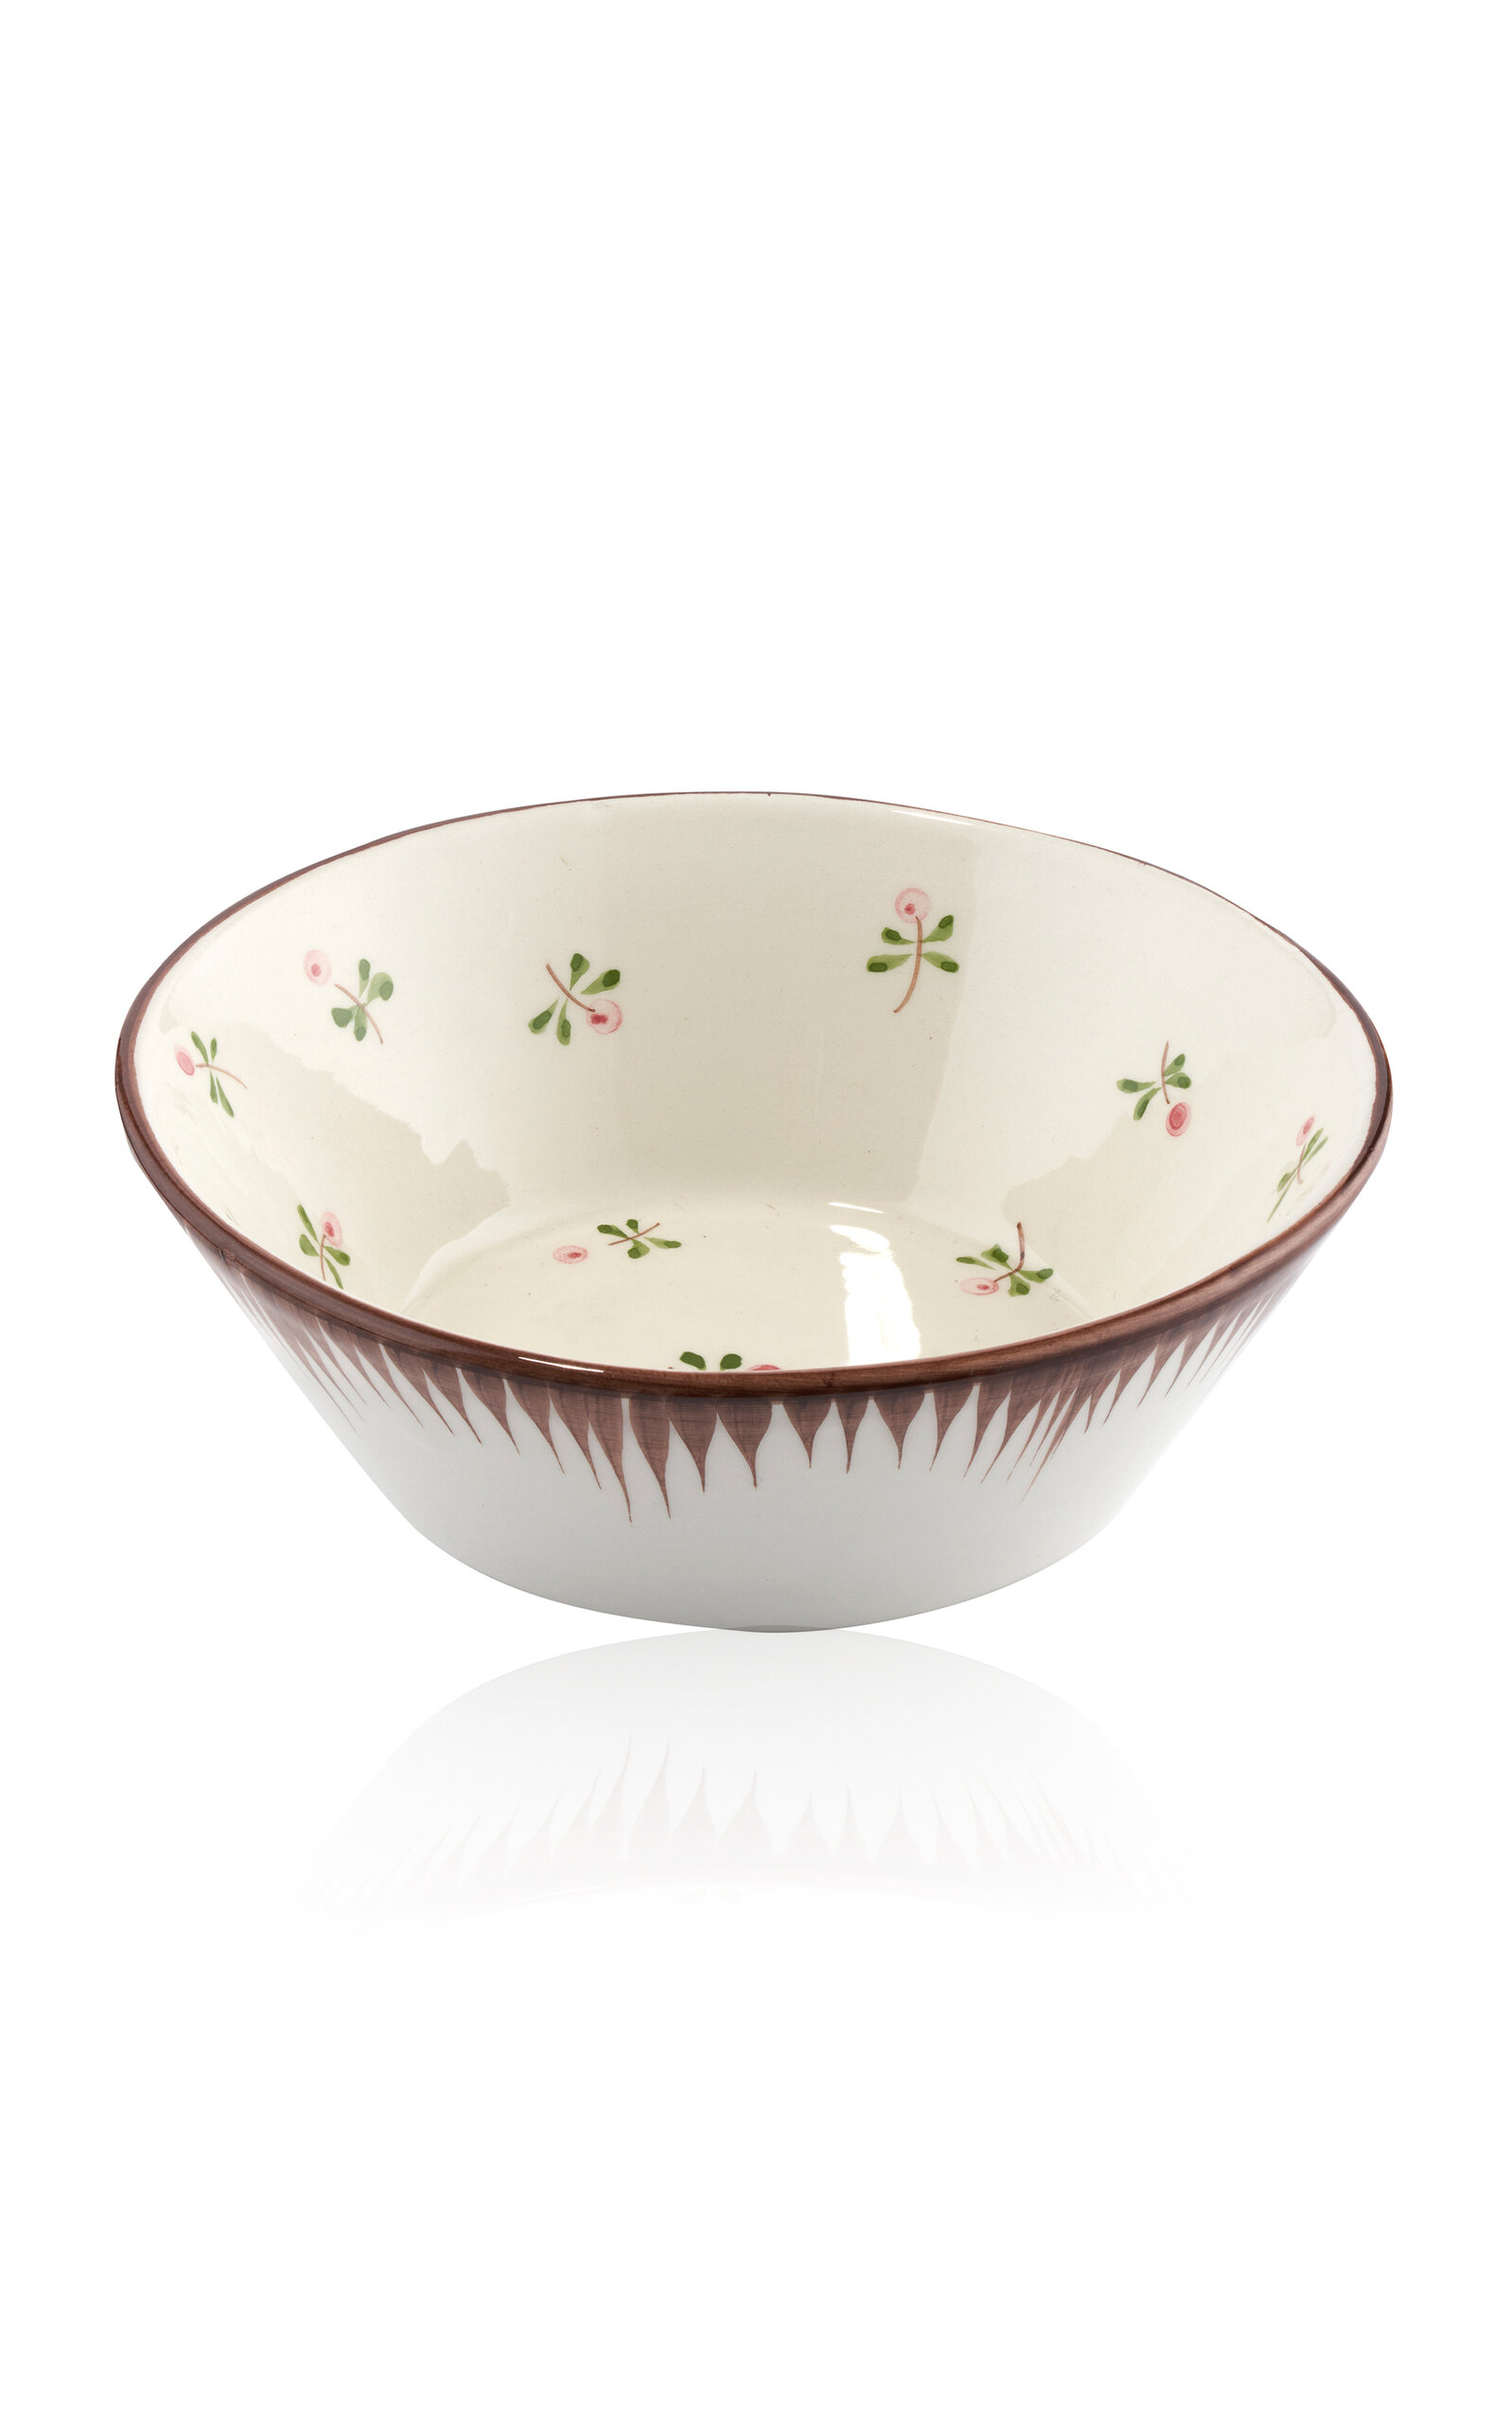 Remy Renzullo X Carolina Irving & Daughters Lily Cereal Bowl In Brown